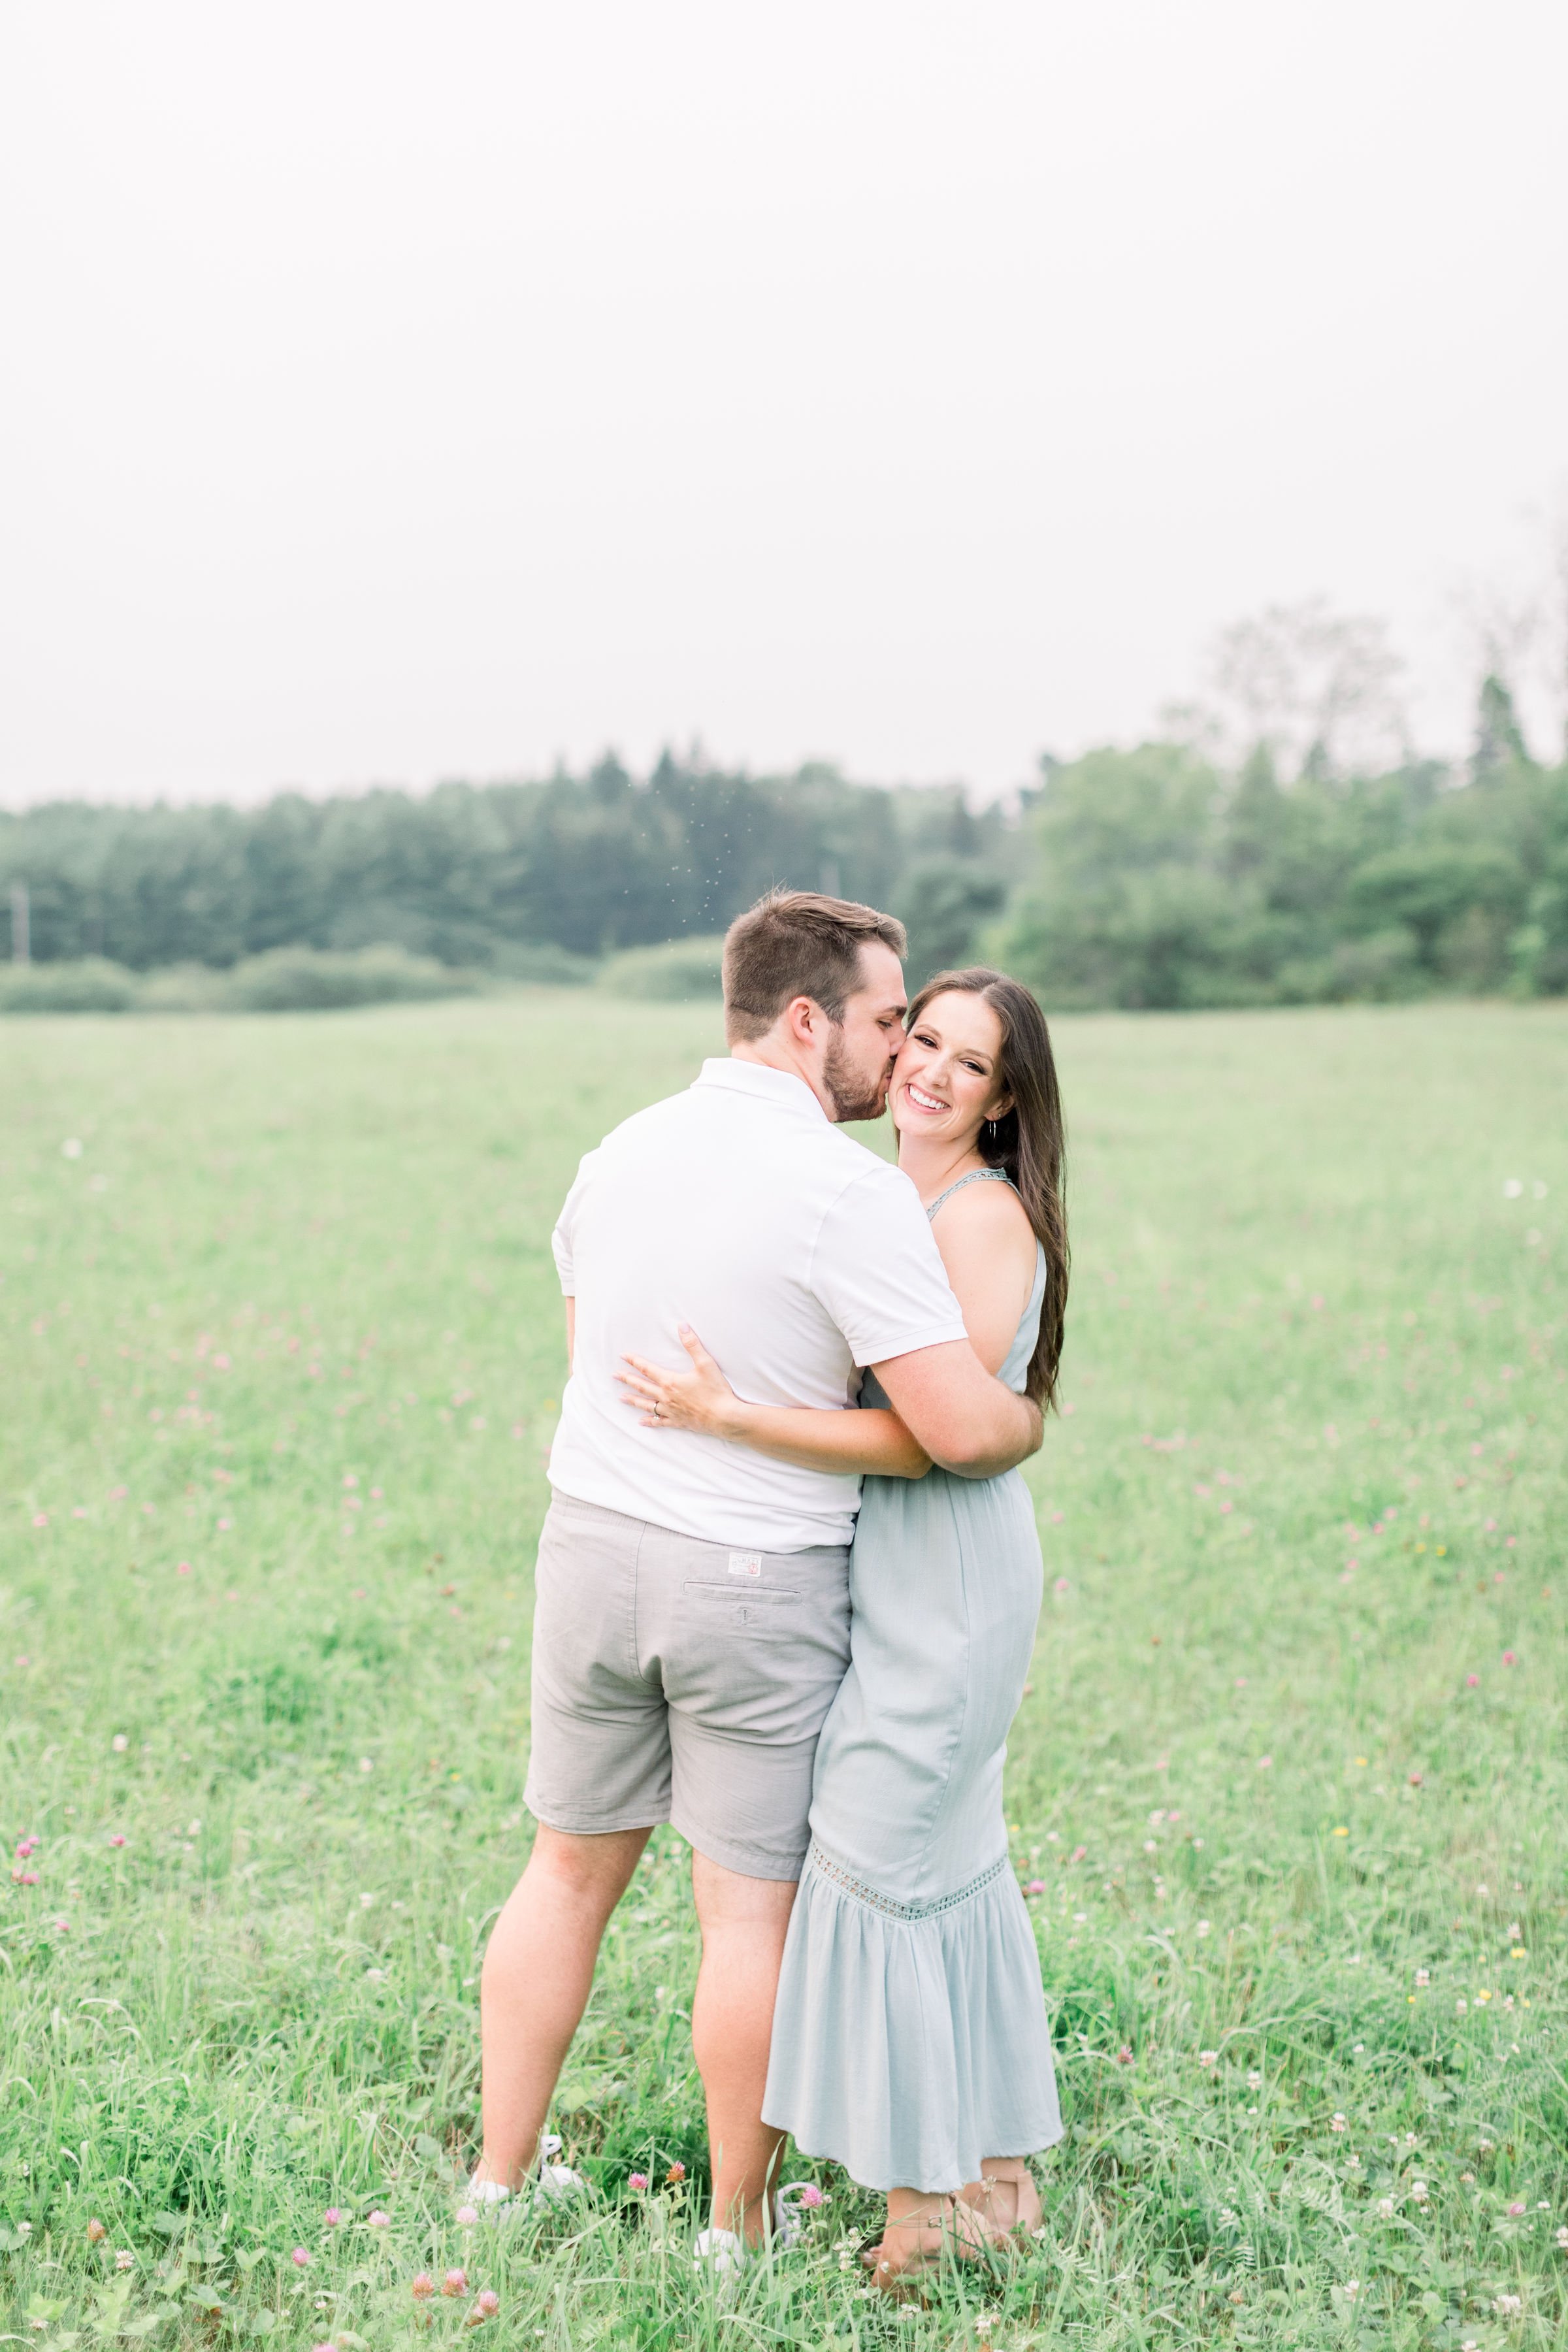  Ontario engagement photographer captures a man kissing his fiance's cheek by Chelsea Mason Photography. she said yes kisses #Kingstonengagement #GrassCreekParkPortraits #Ontarioengagementphotographers #Chelseamasonphotography #Chelseamasonengagement